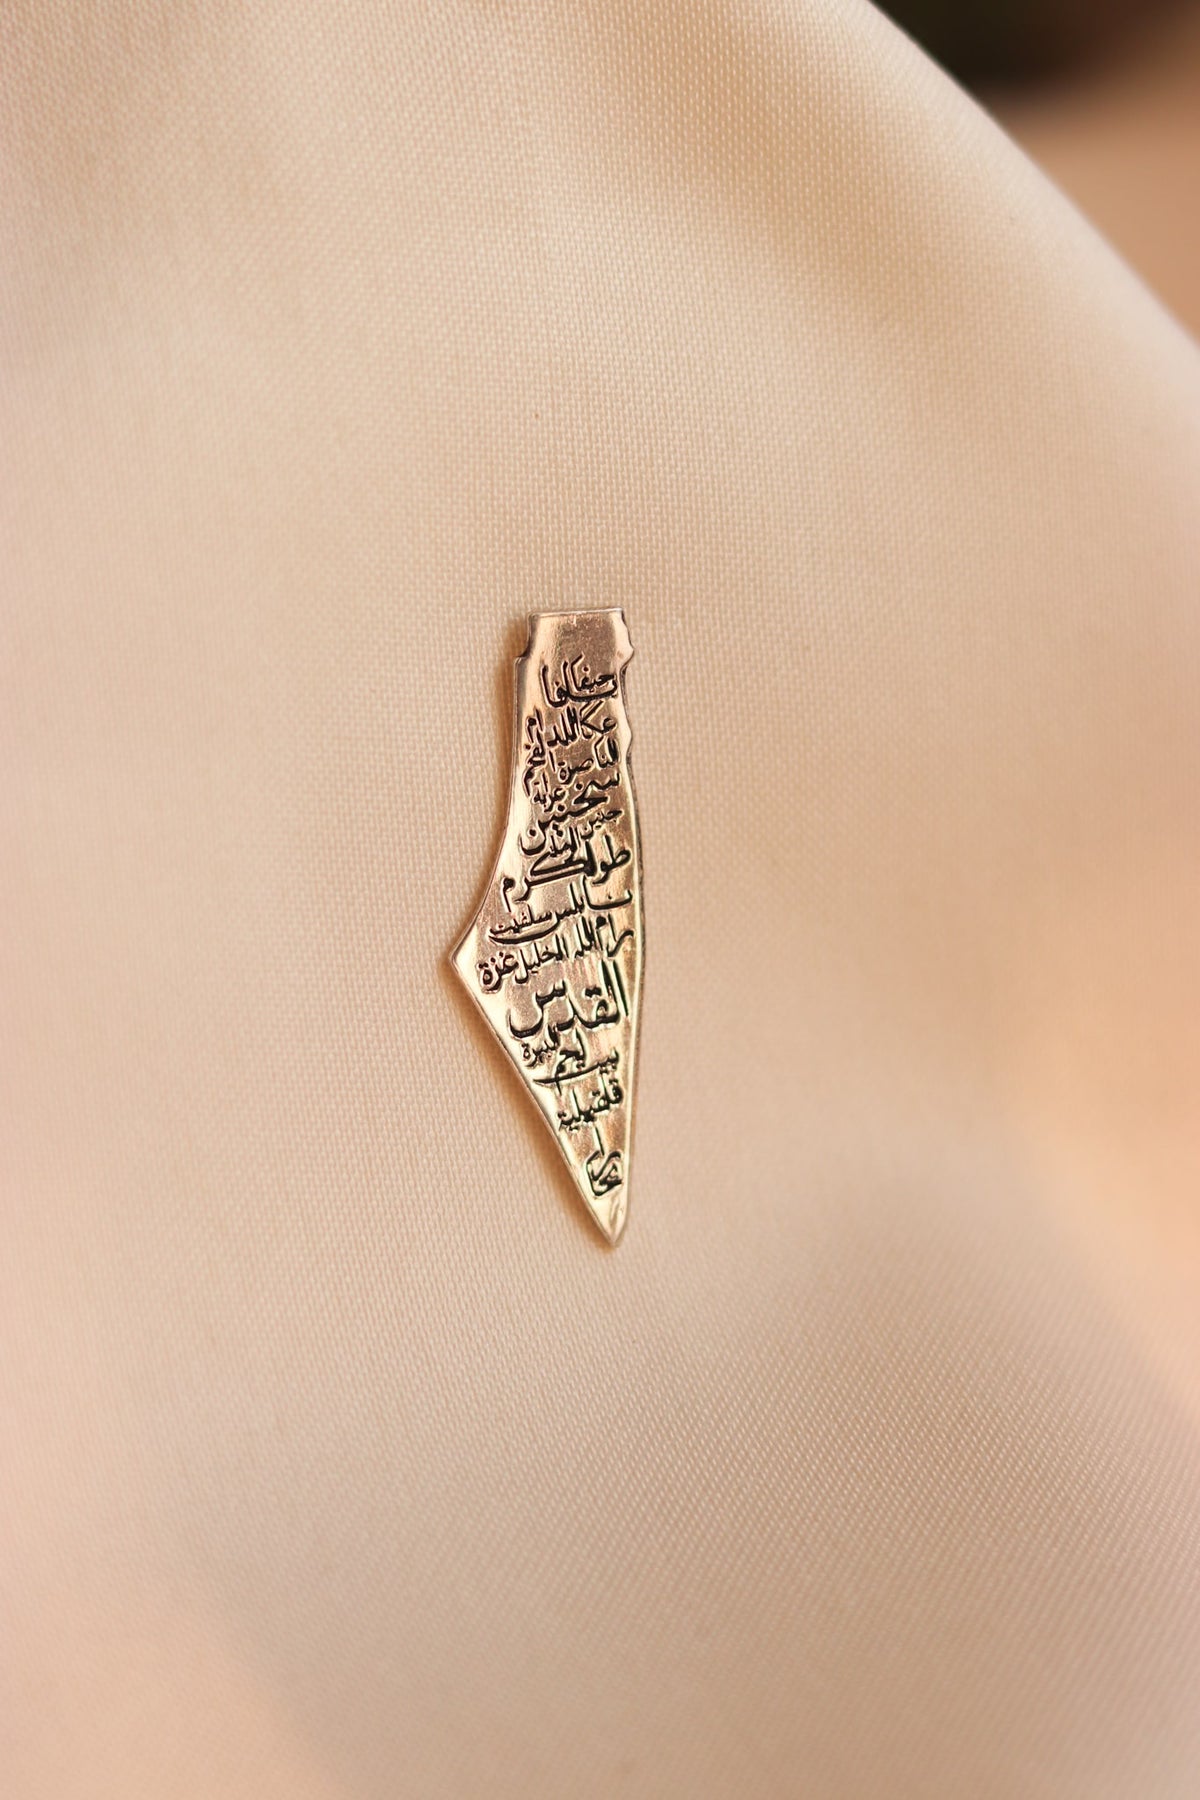 Palestine map with Palestine cities written inside in Arabic pin